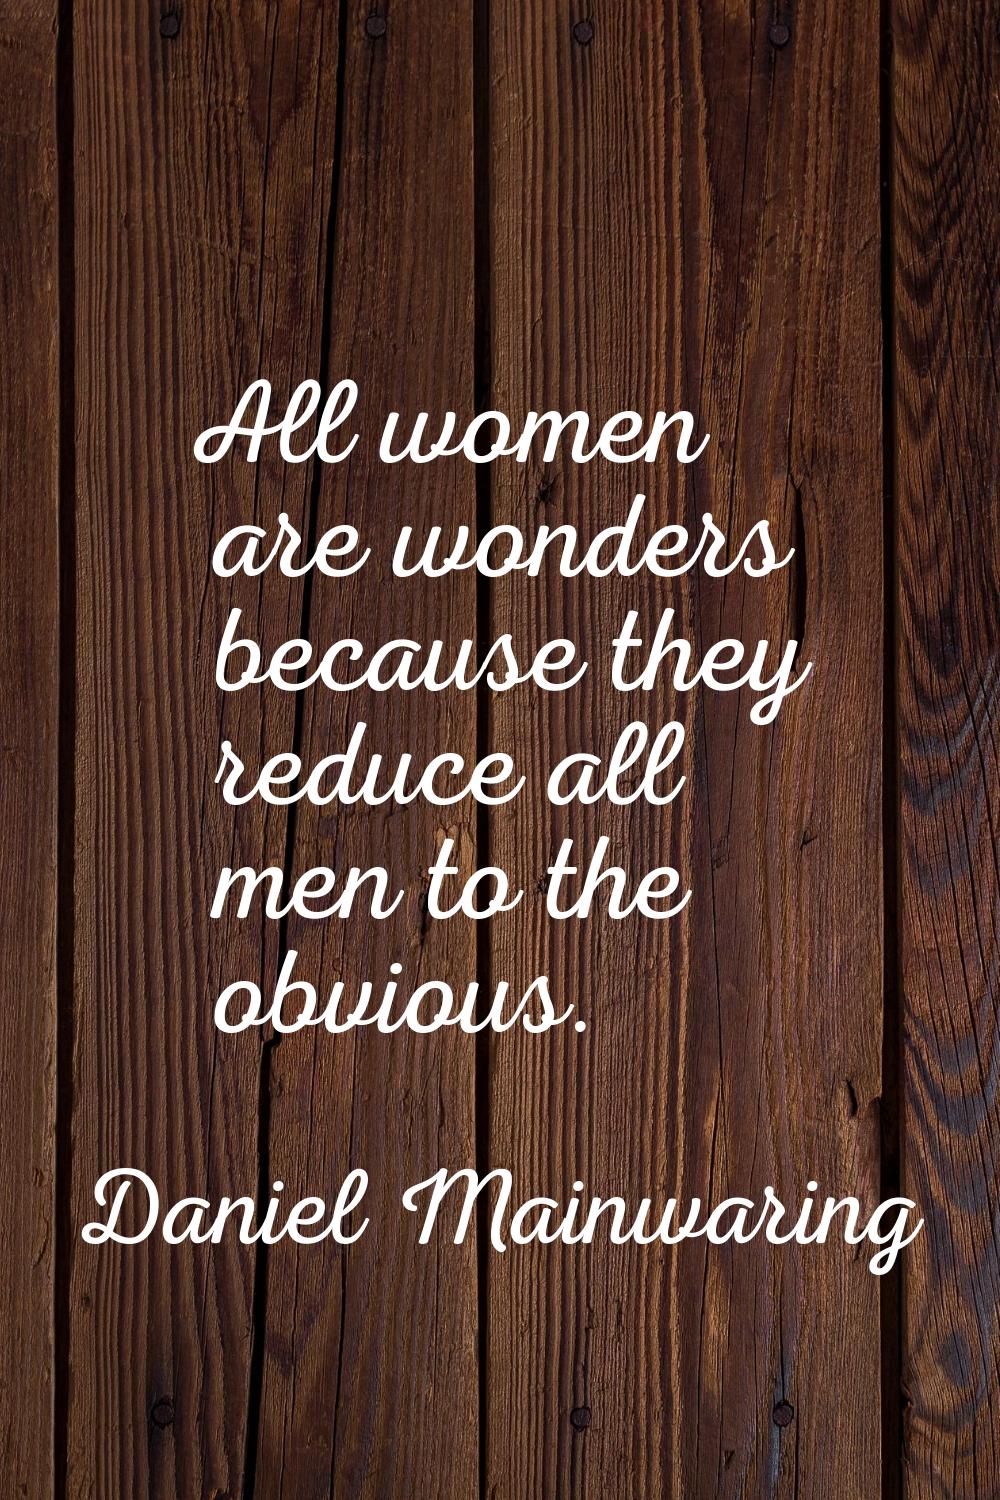 All women are wonders because they reduce all men to the obvious.